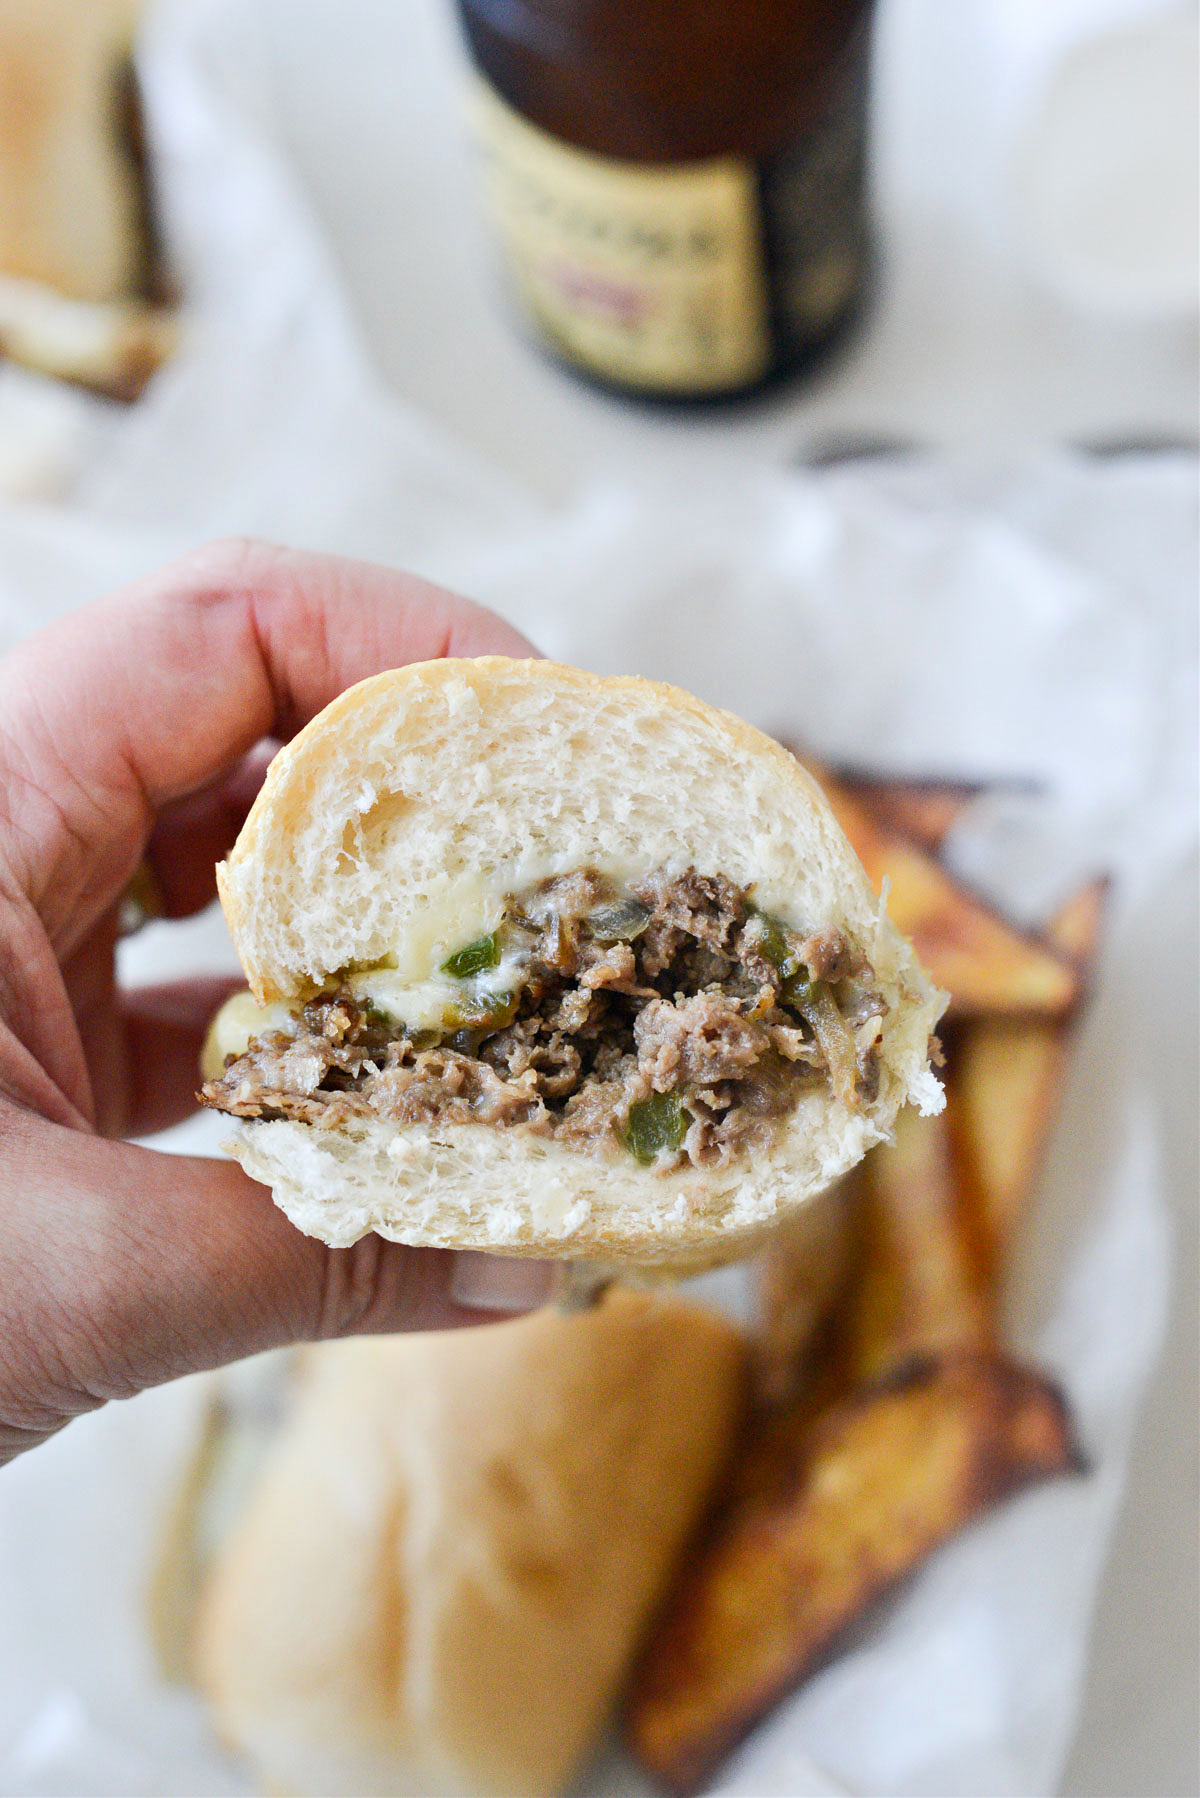 https://www.simplyscratch.com/wp-content/uploads/2022/10/Philly-Cheesesteak-Sandwiches-l-SimplyScratch-25.jpg